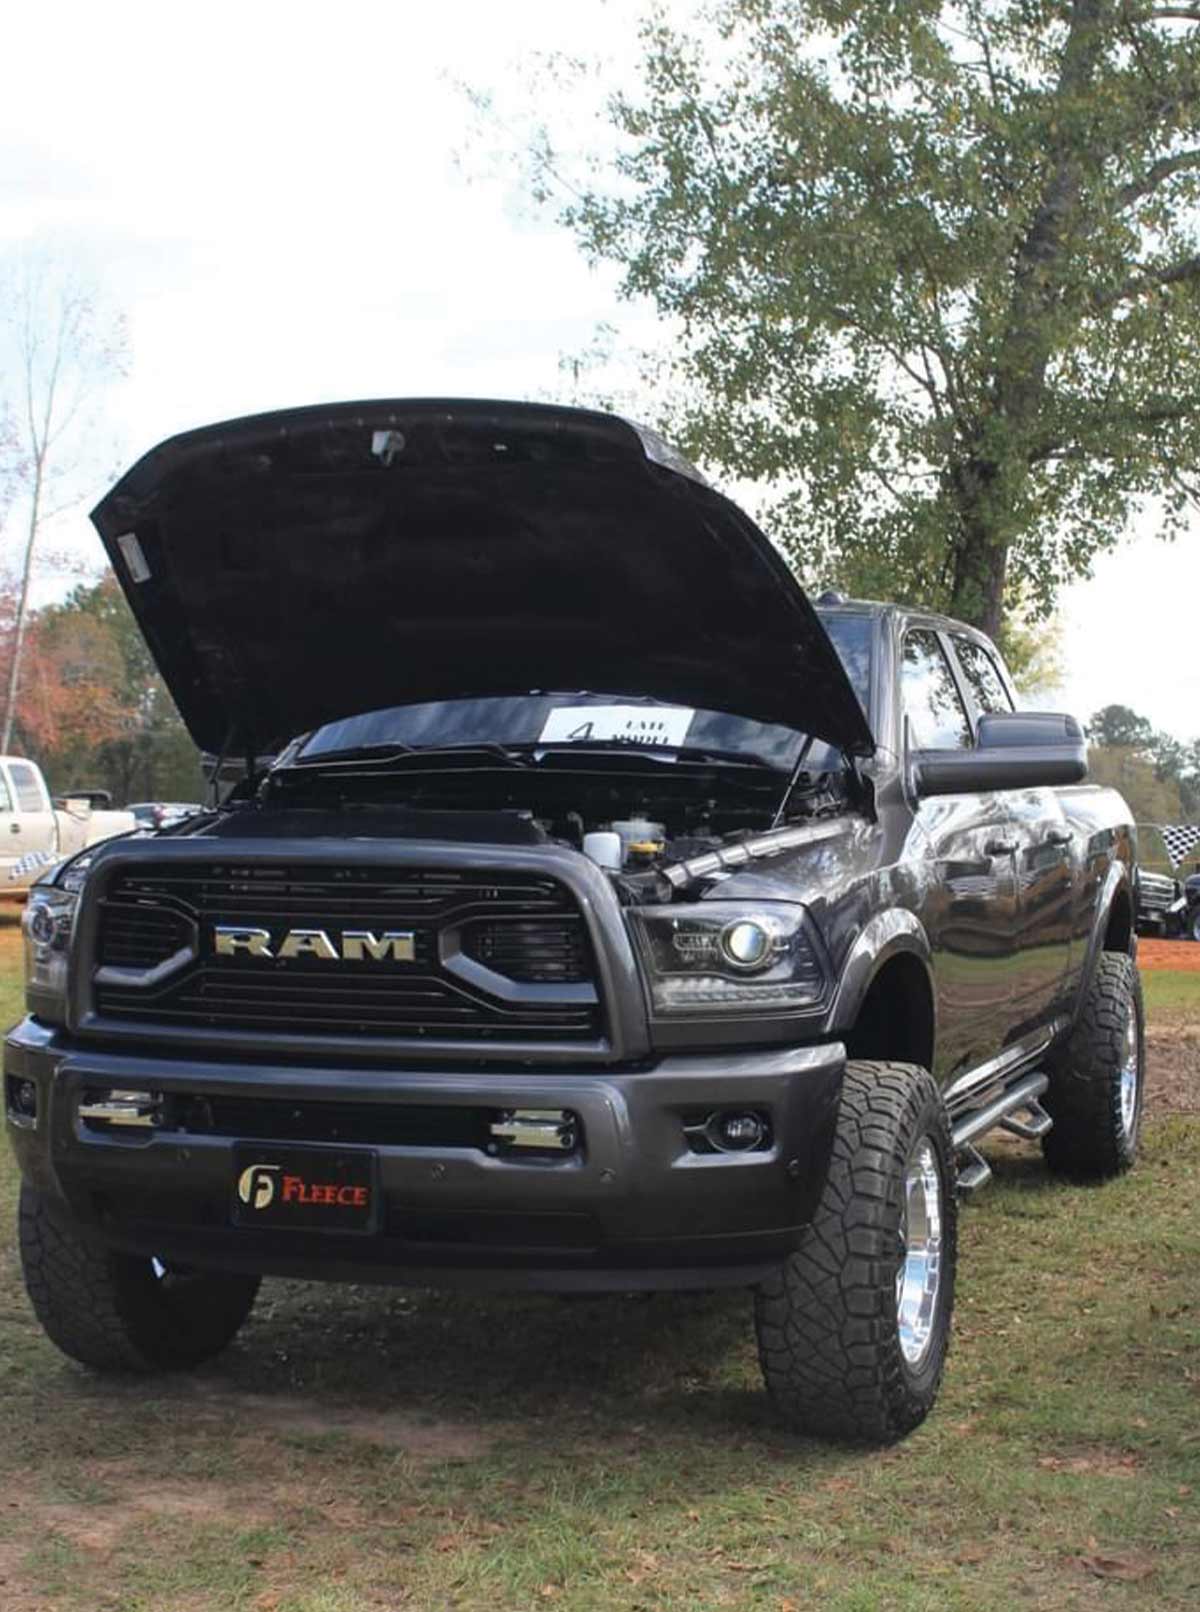 Dodge RAM with it's hood popped